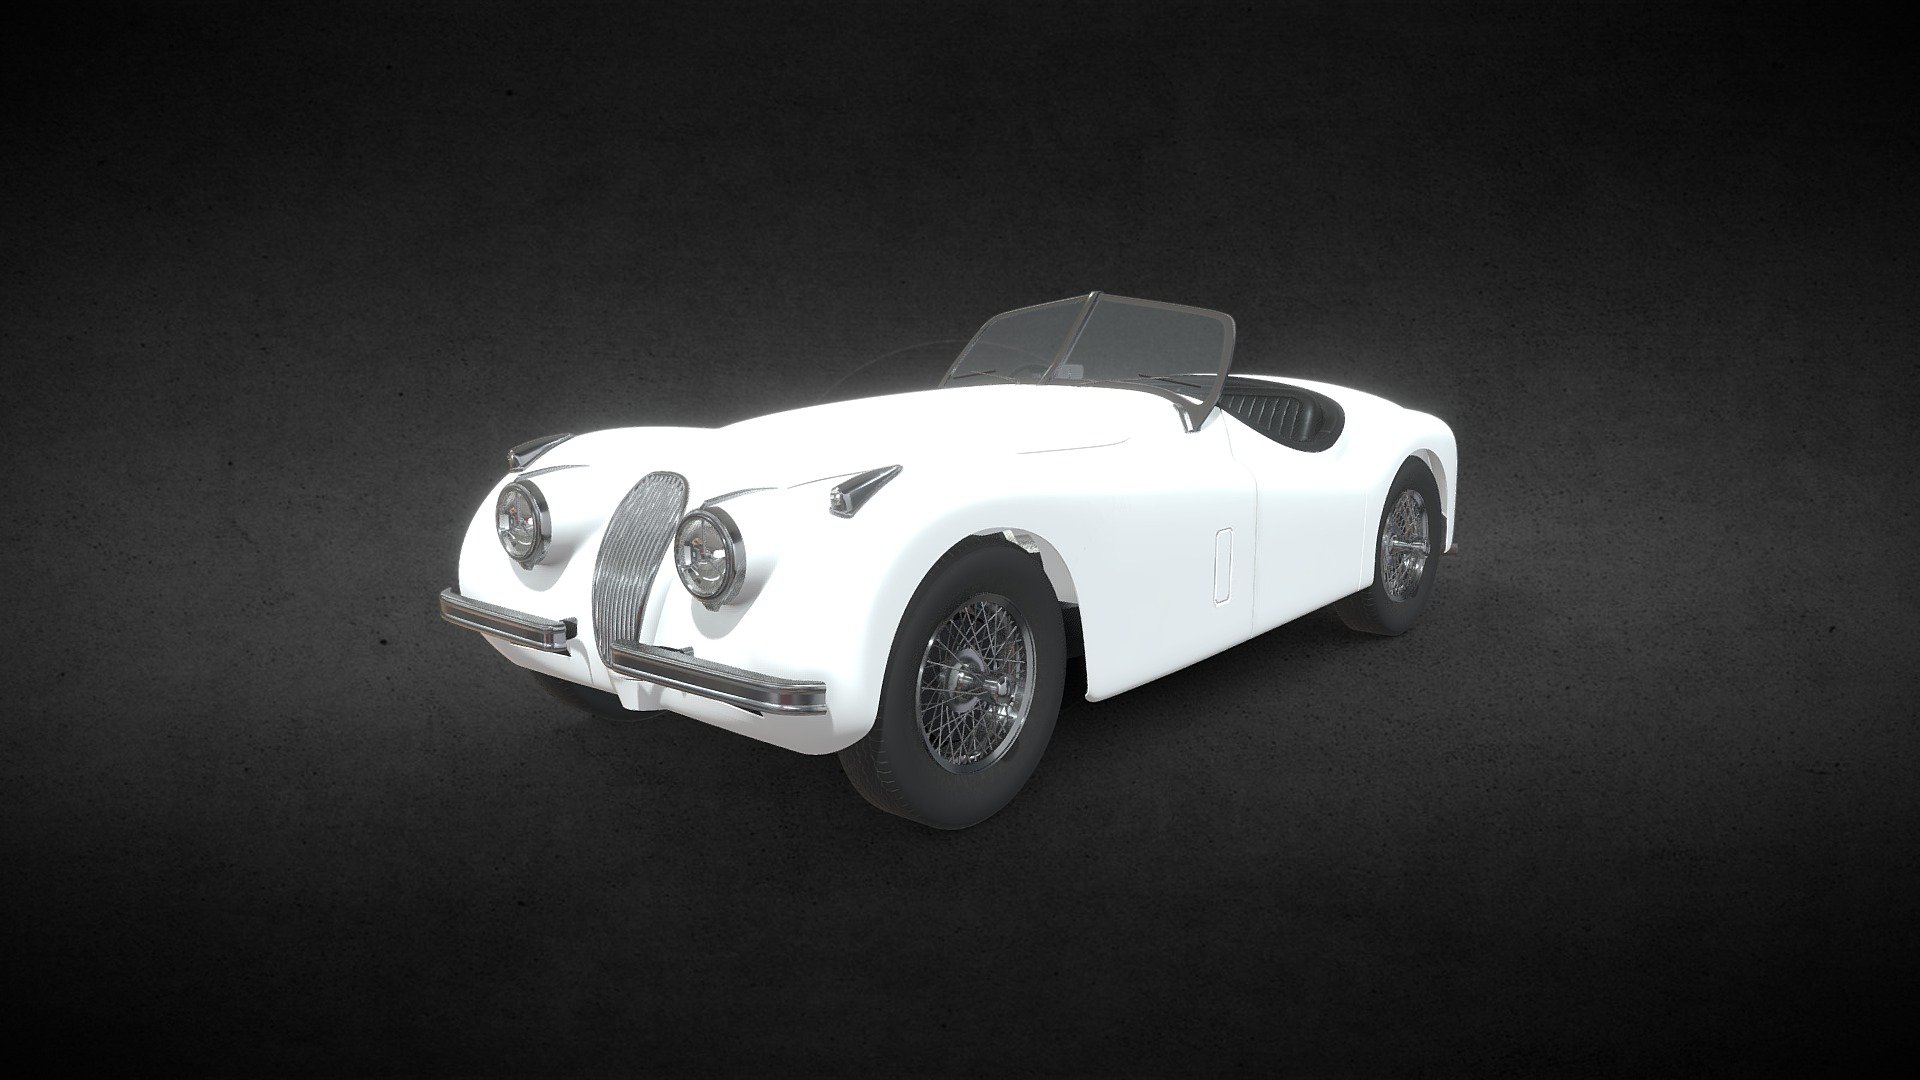 A simlified high-poly model of Jaguar XK120 from 1948. 

Modeled in blender 2.93.5. Some bump textures (converted finally to normal maps) created in Inkscape. Textured in Quixel Mixer.

I hope you'd like it :) - 1948 Jaguar XK120 - 3D model by KrStolorz (Krzysztof Stolorz) (@KrStolorz) 3d model